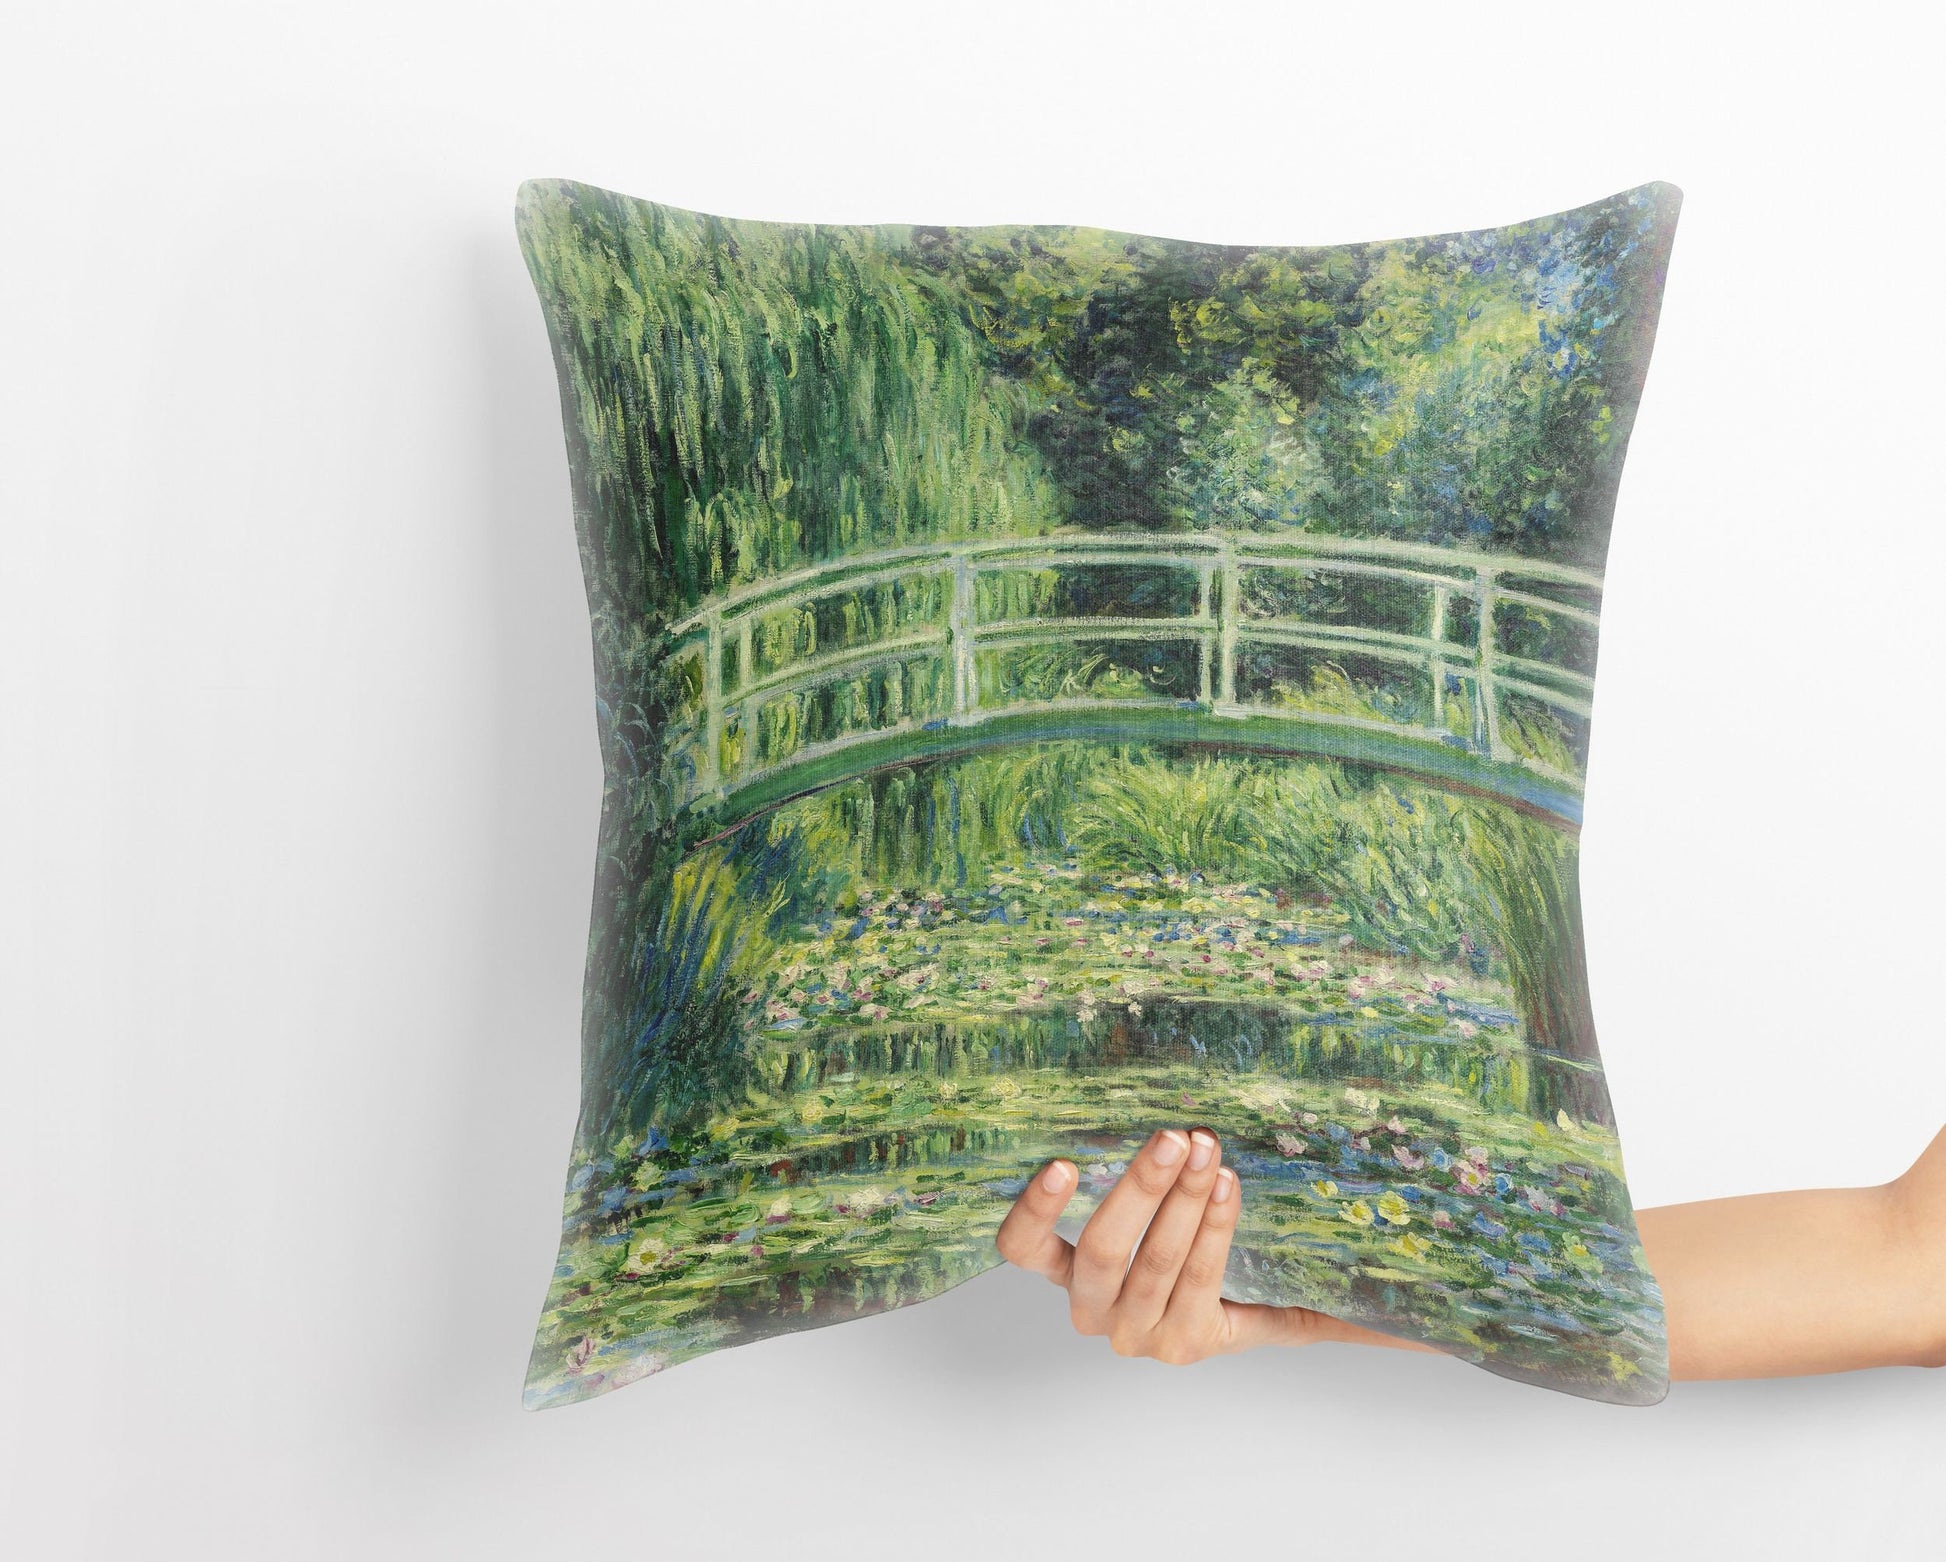 Claude Monet Famous Painting White Water Lilies, Decorative Pillow, Abstract Throw Pillow Cover, Soft Pillow Cases, Green Pillow Cases